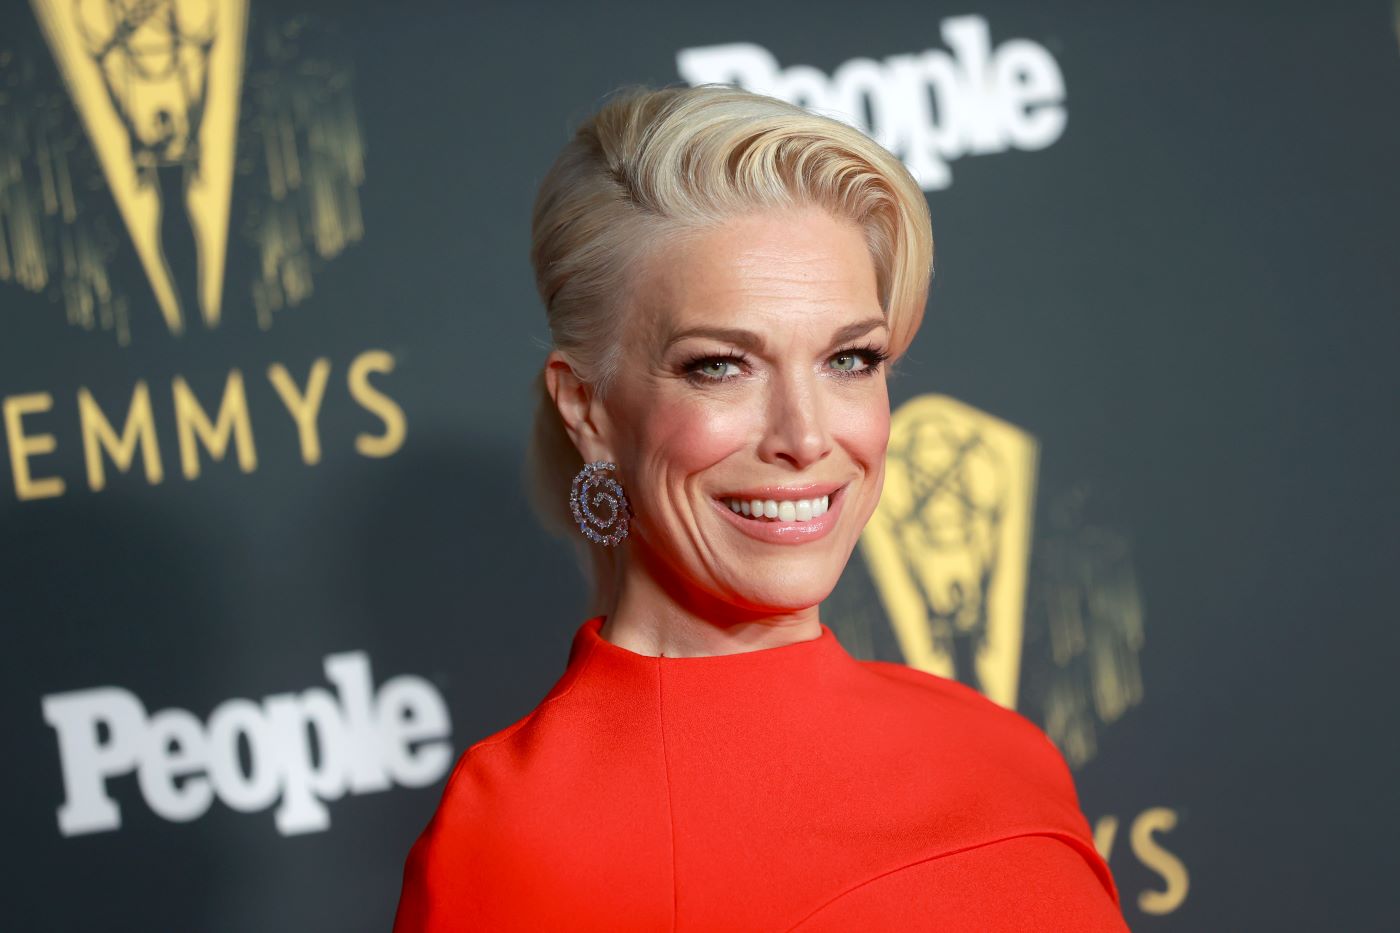 Hannah Waddingham from 'Ted Lasso' wearing a red top in front of a black gold and white background.